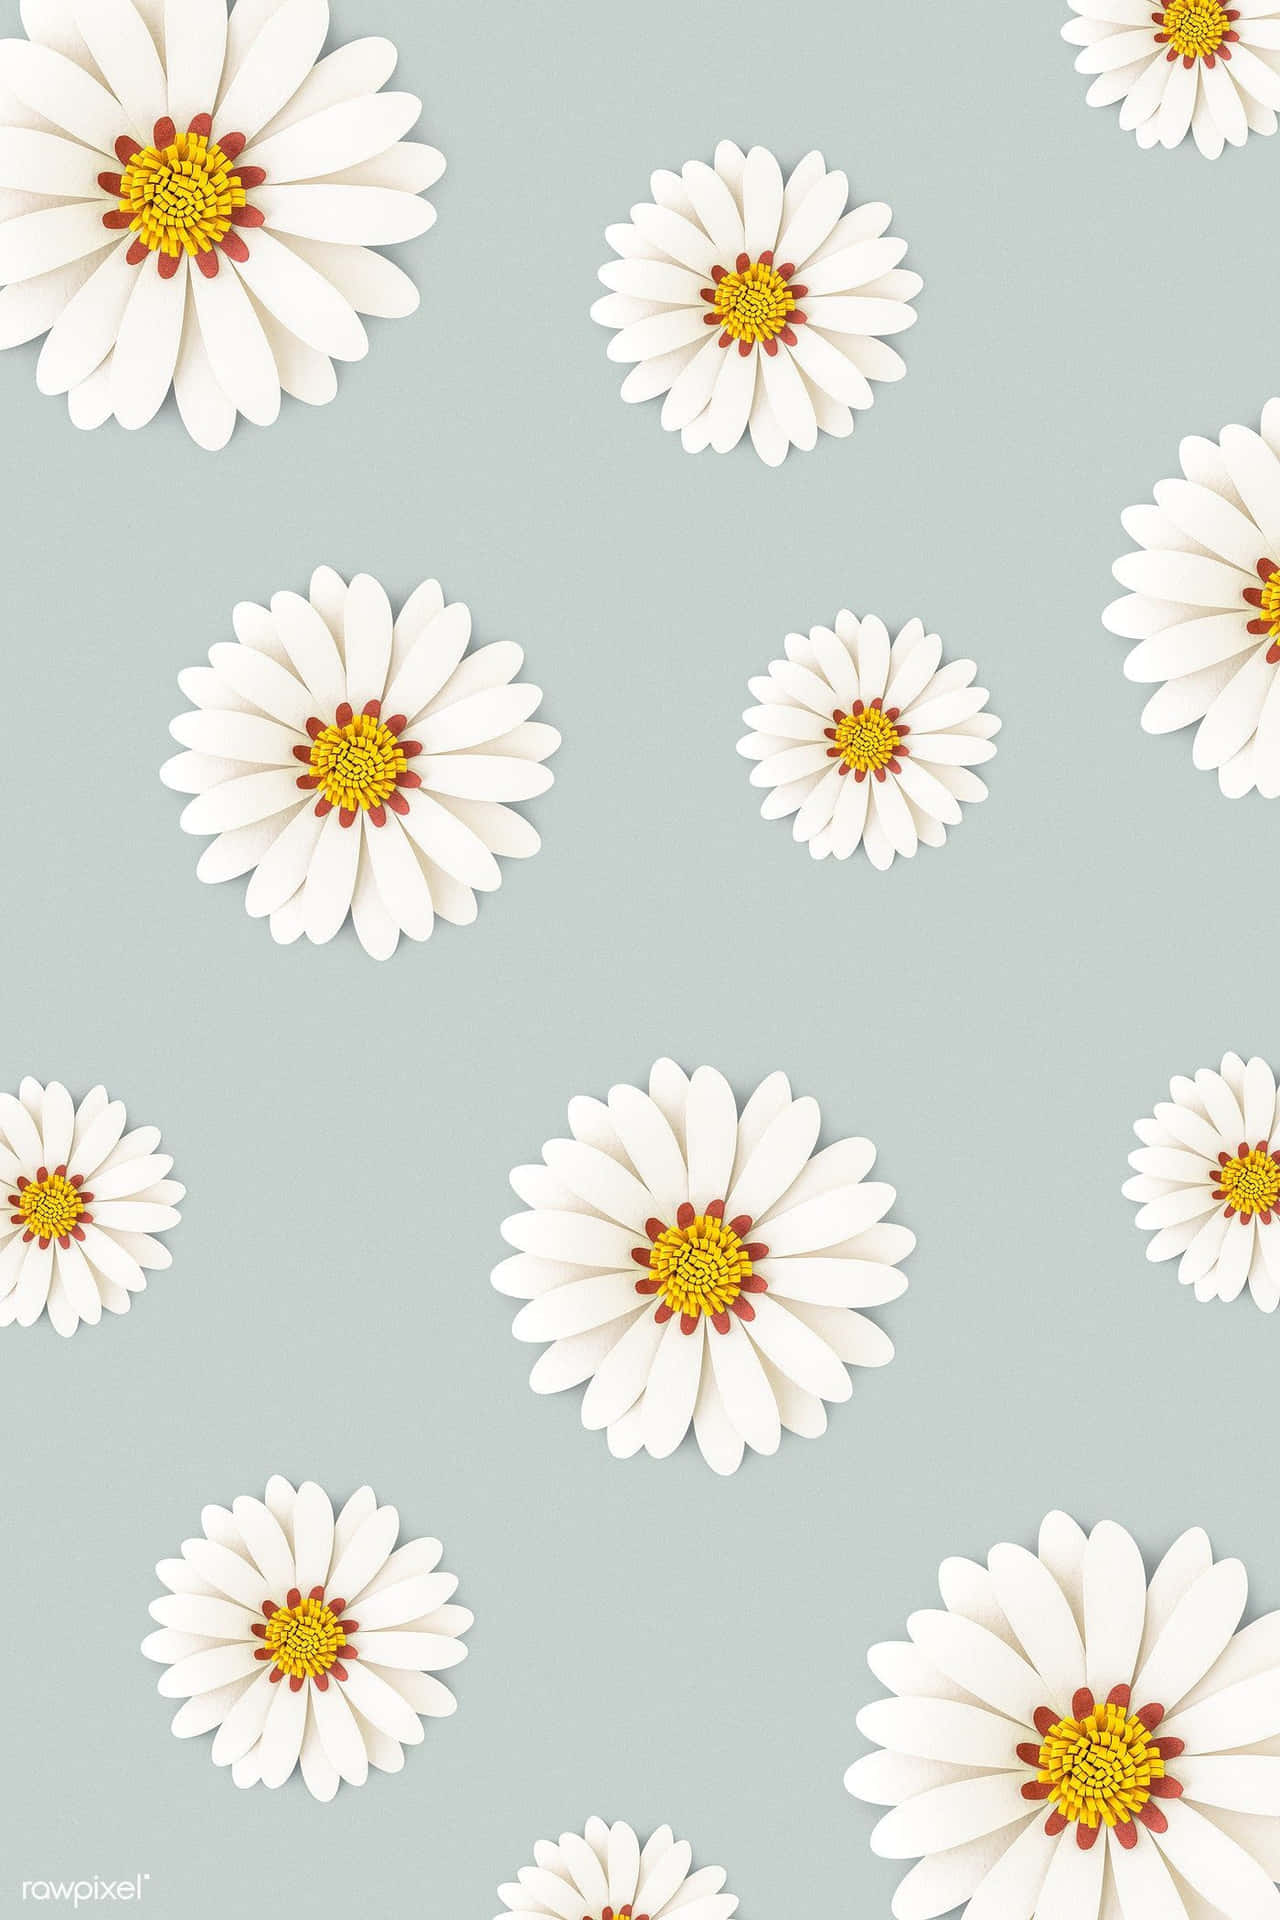 "A mesmerizing daisy in hues of yellow and white blooming in full beauty." Wallpaper